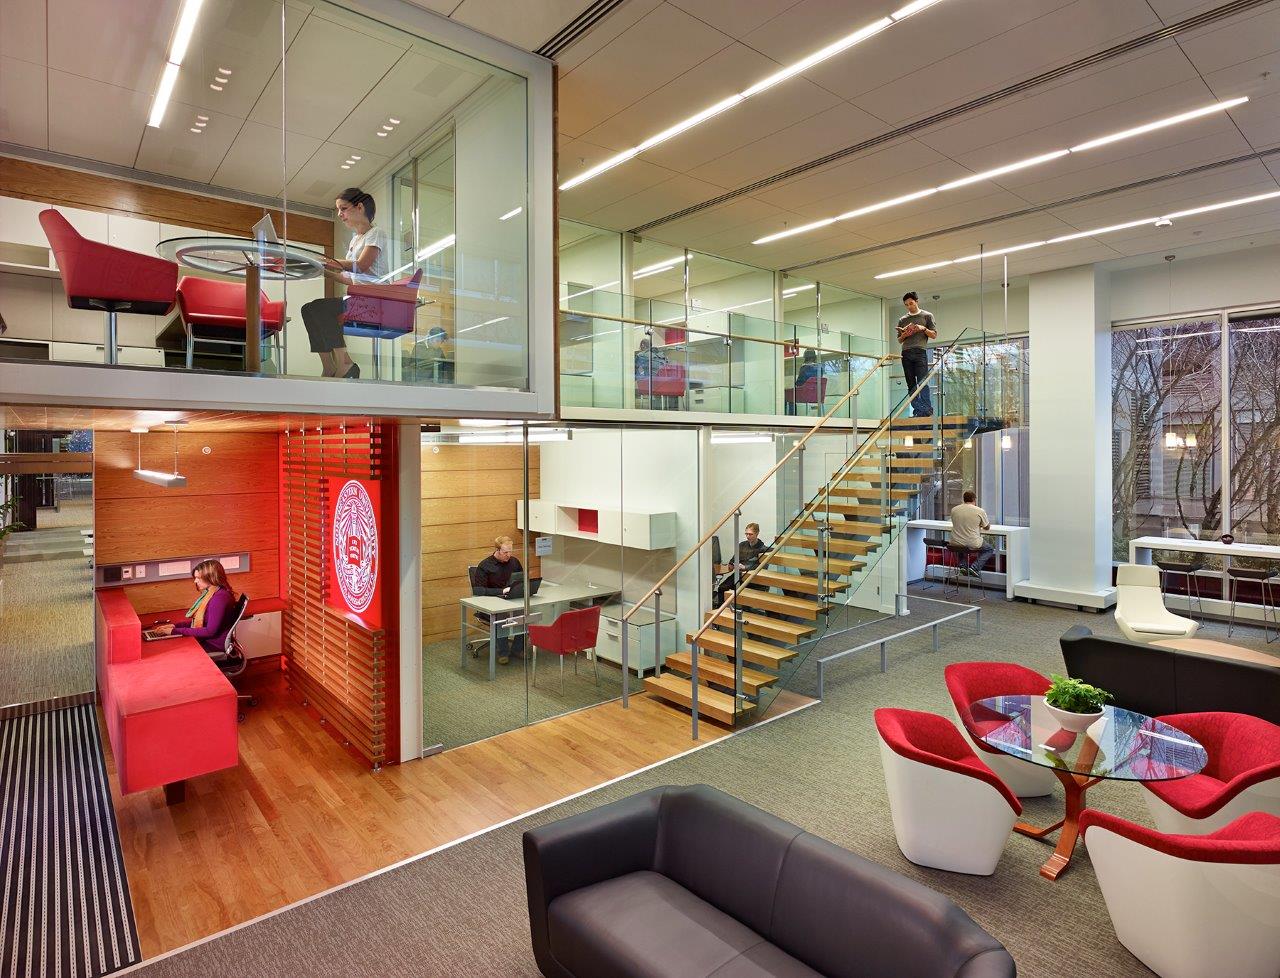 Interior design for students: A view into their future | Building ...